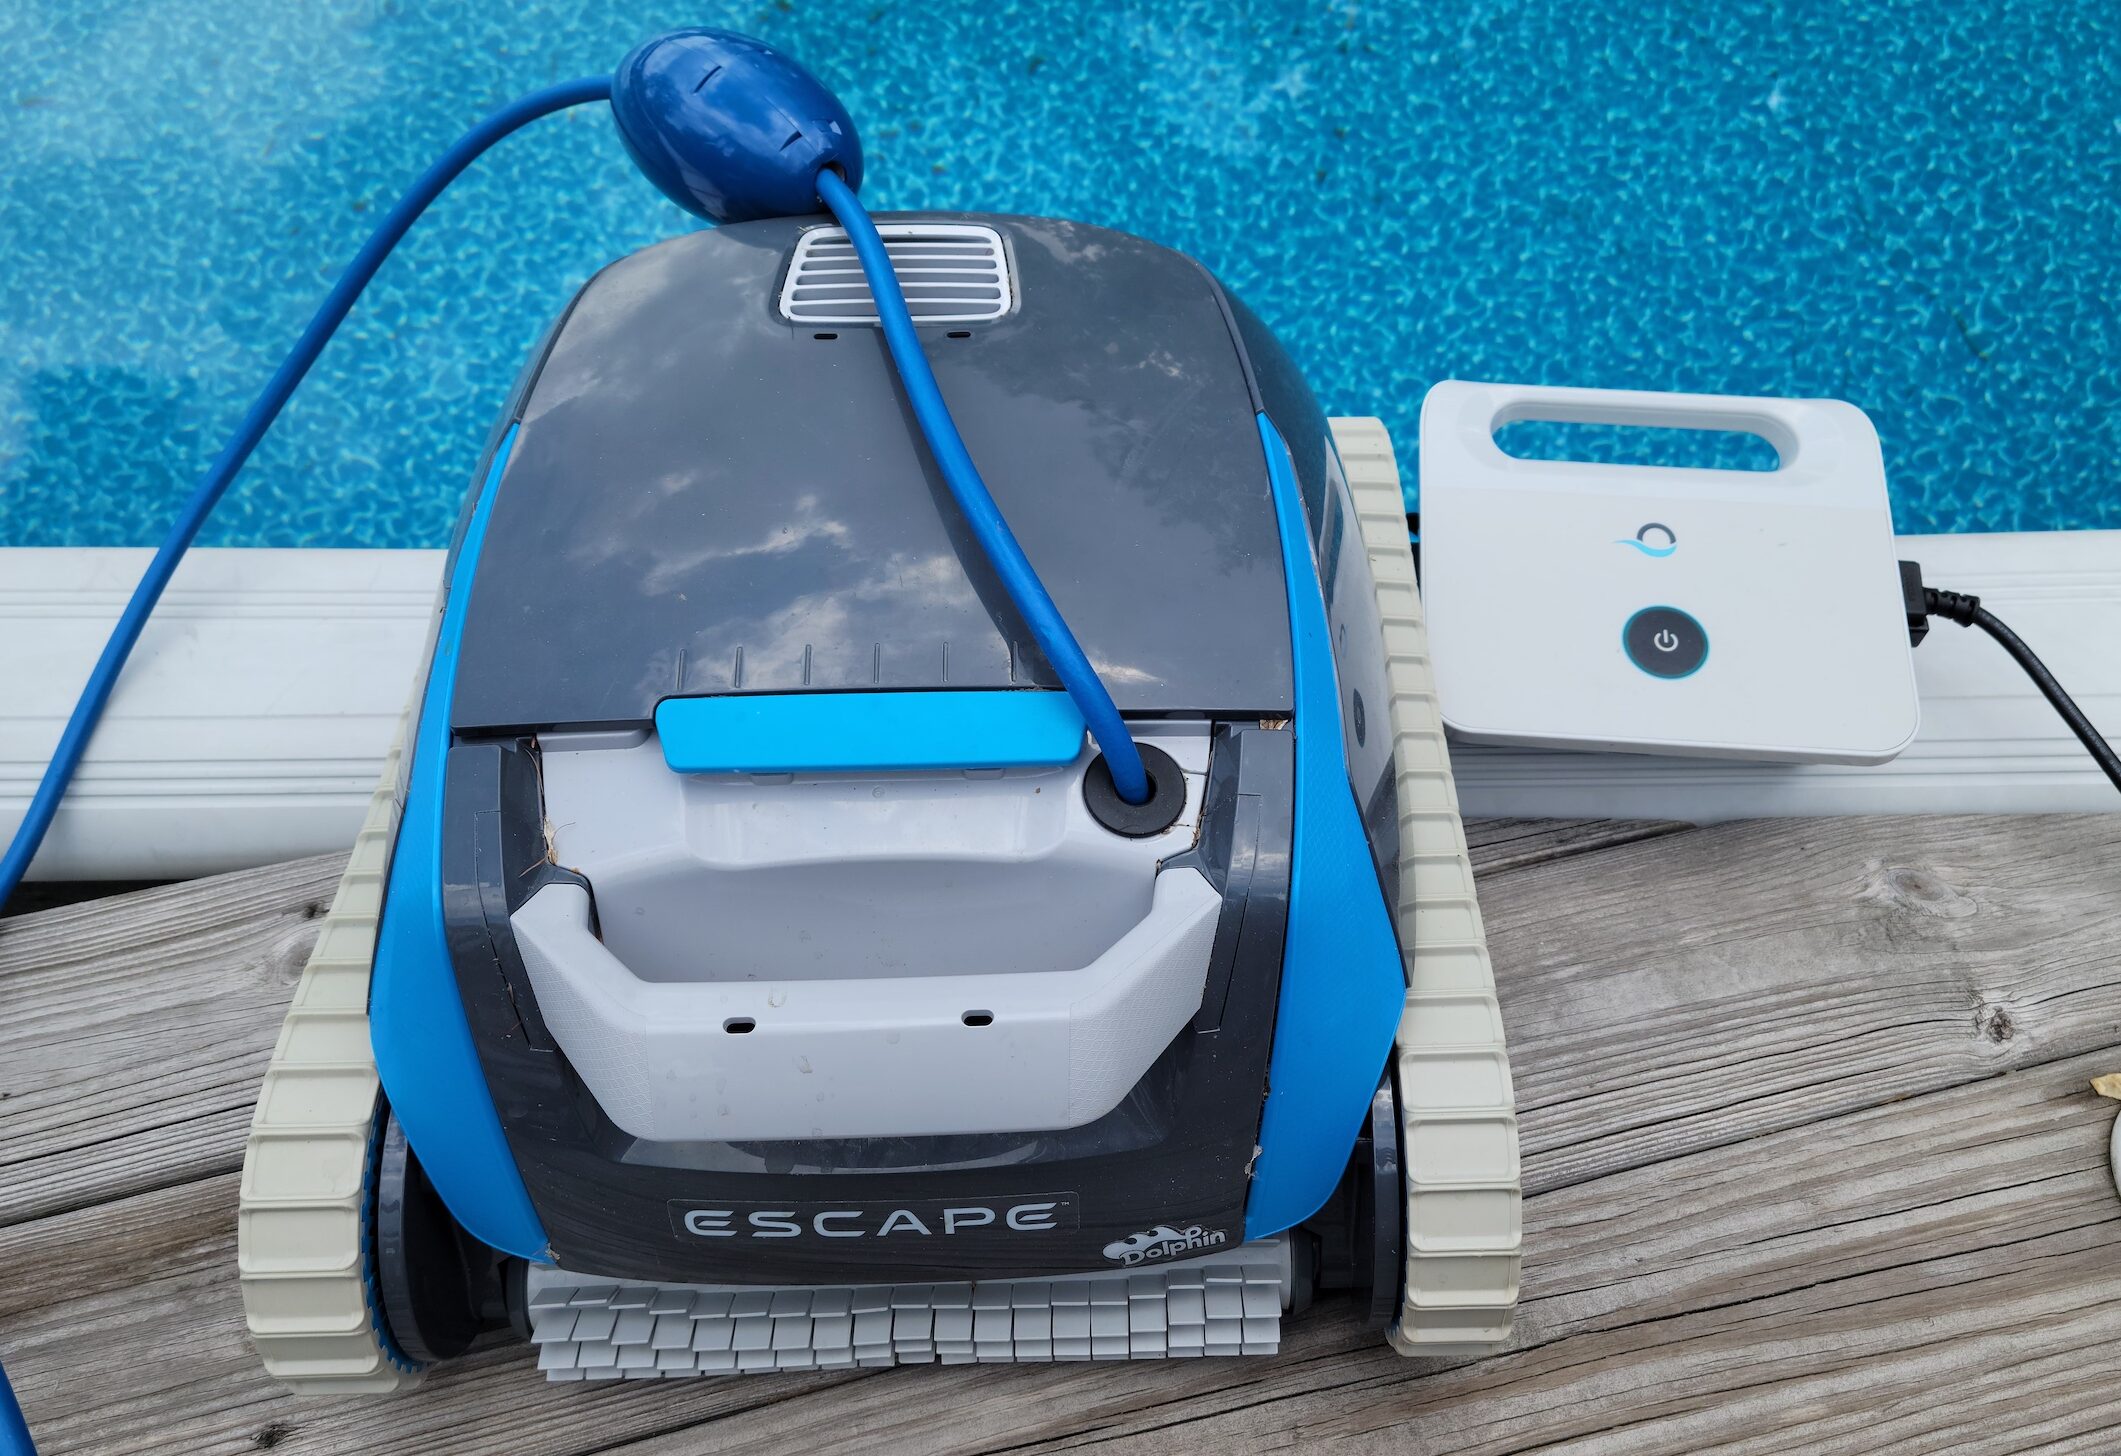 The Dolphin Escape robotic pool cleaner power adaptor set up next to an above-ground pool